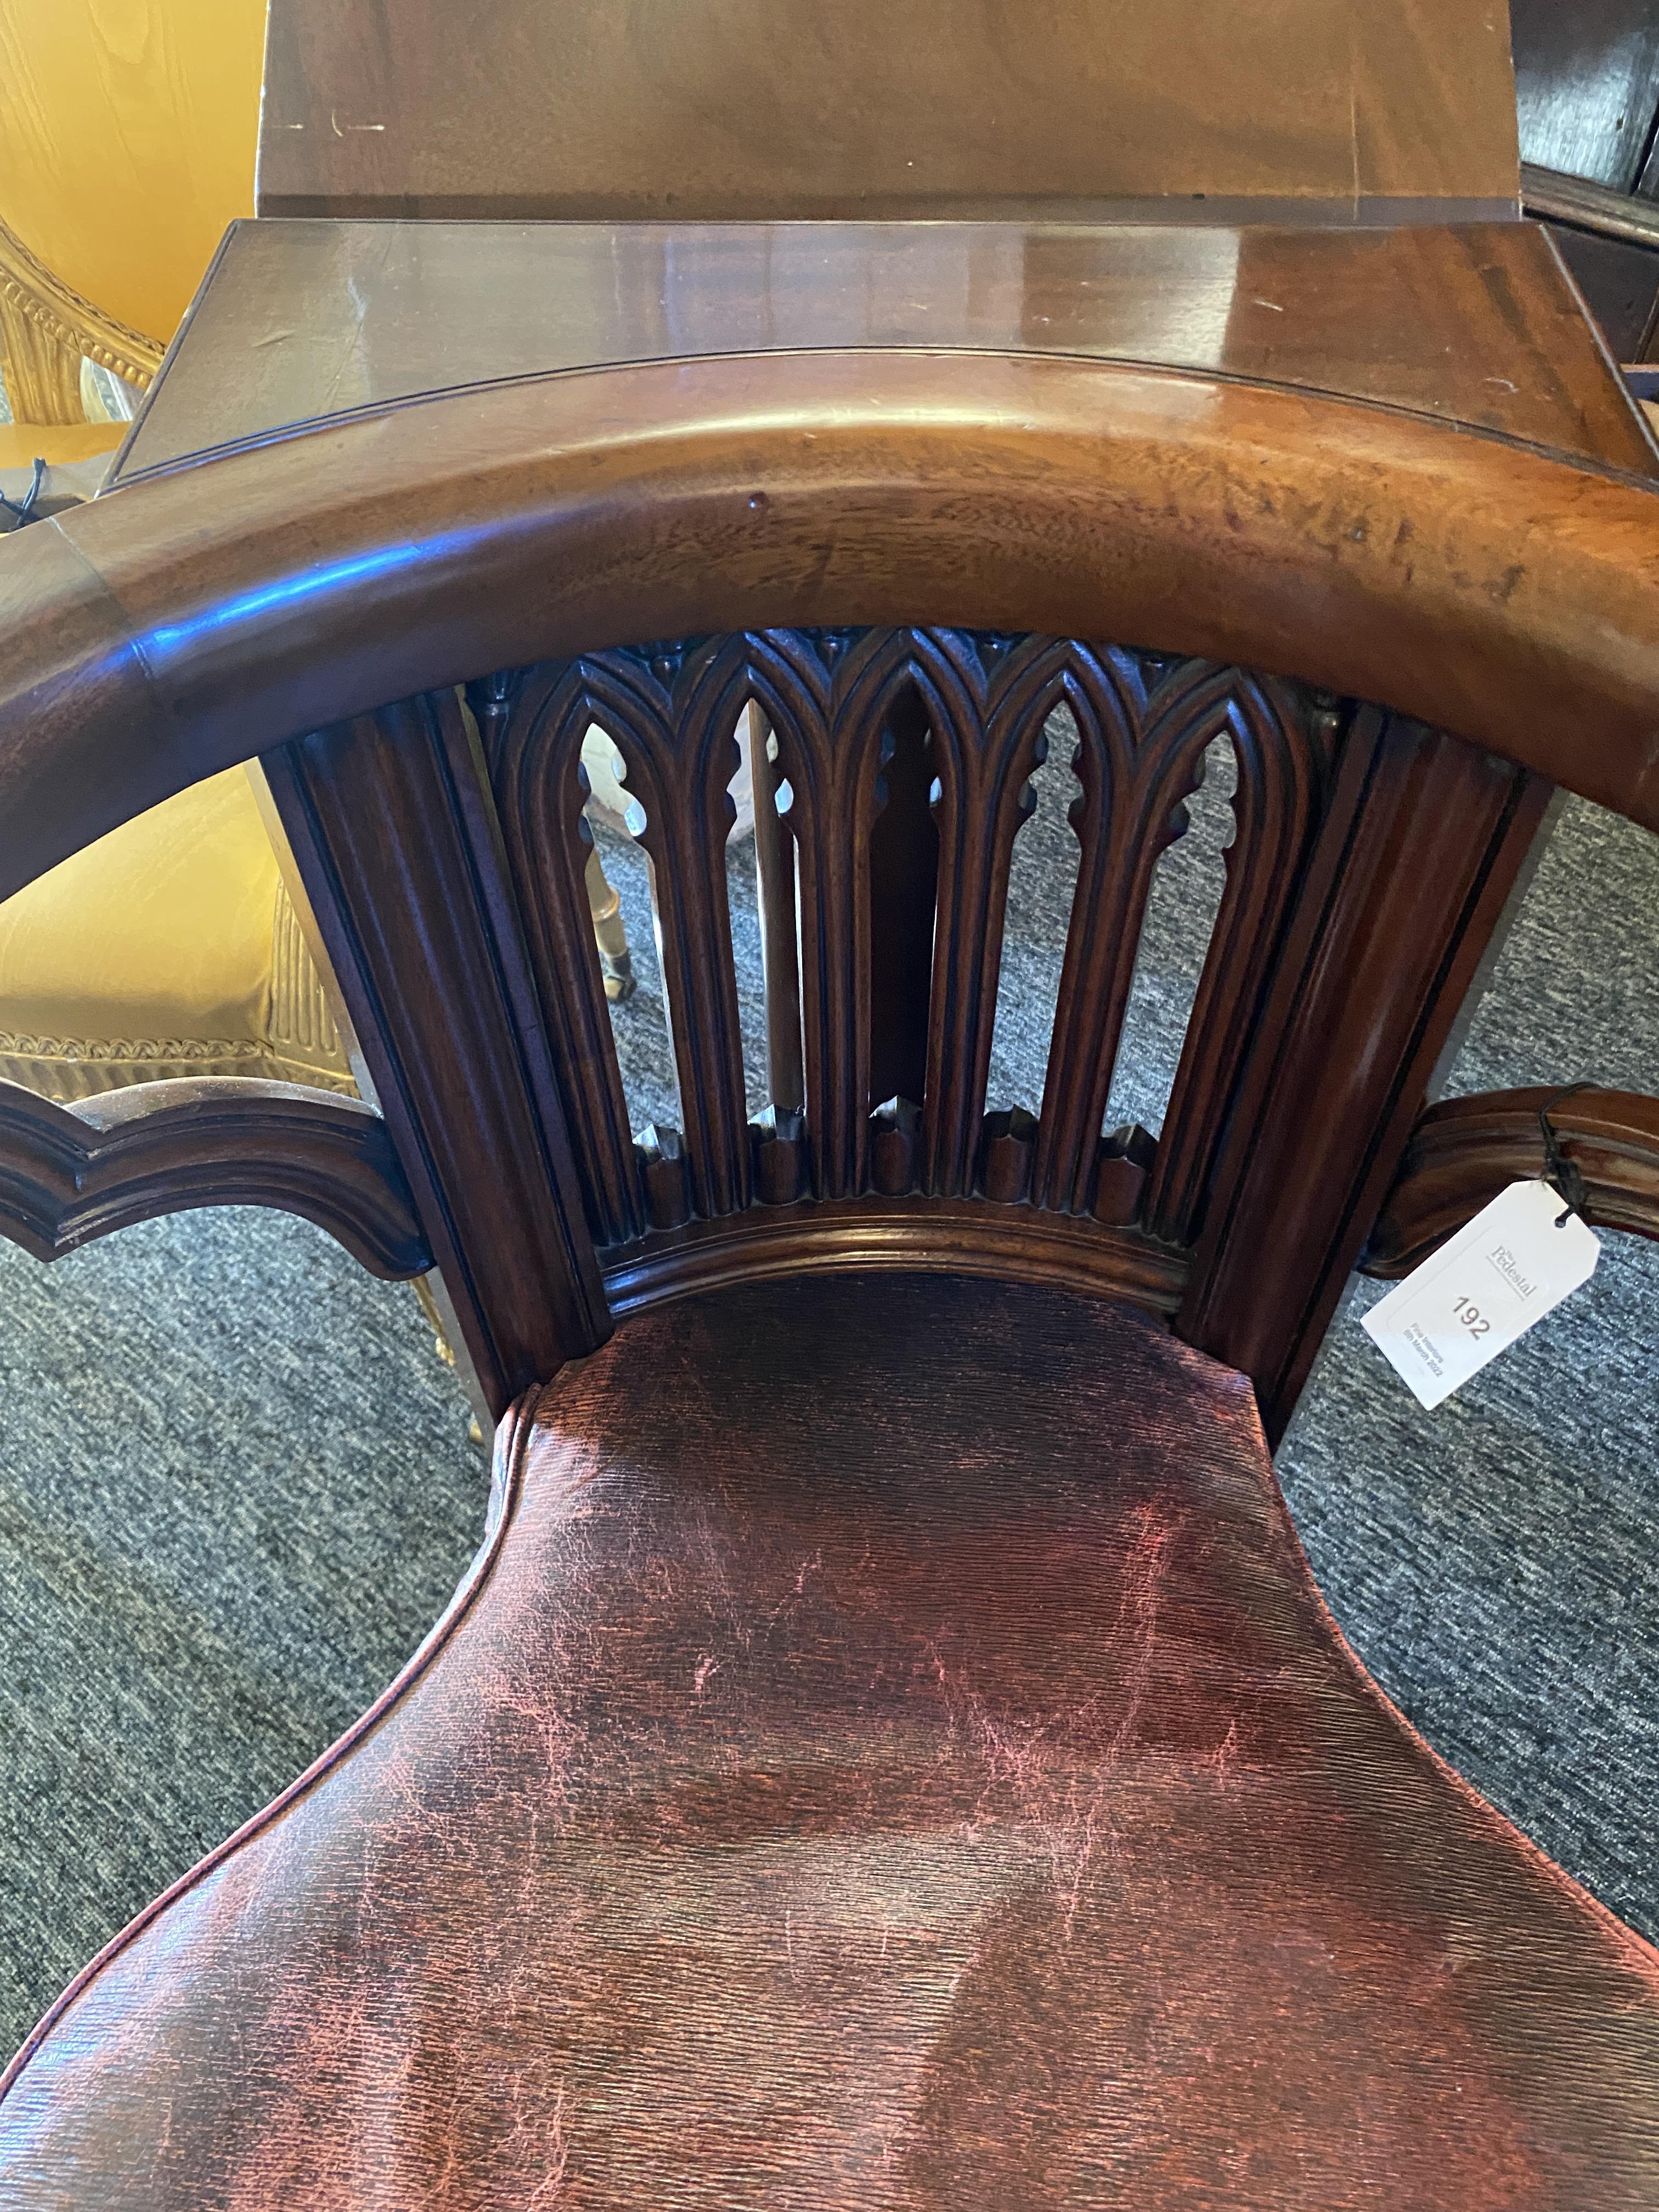 A George IV carved mahogany reading / library chair attributed to Morgan & Saunders - Image 19 of 27